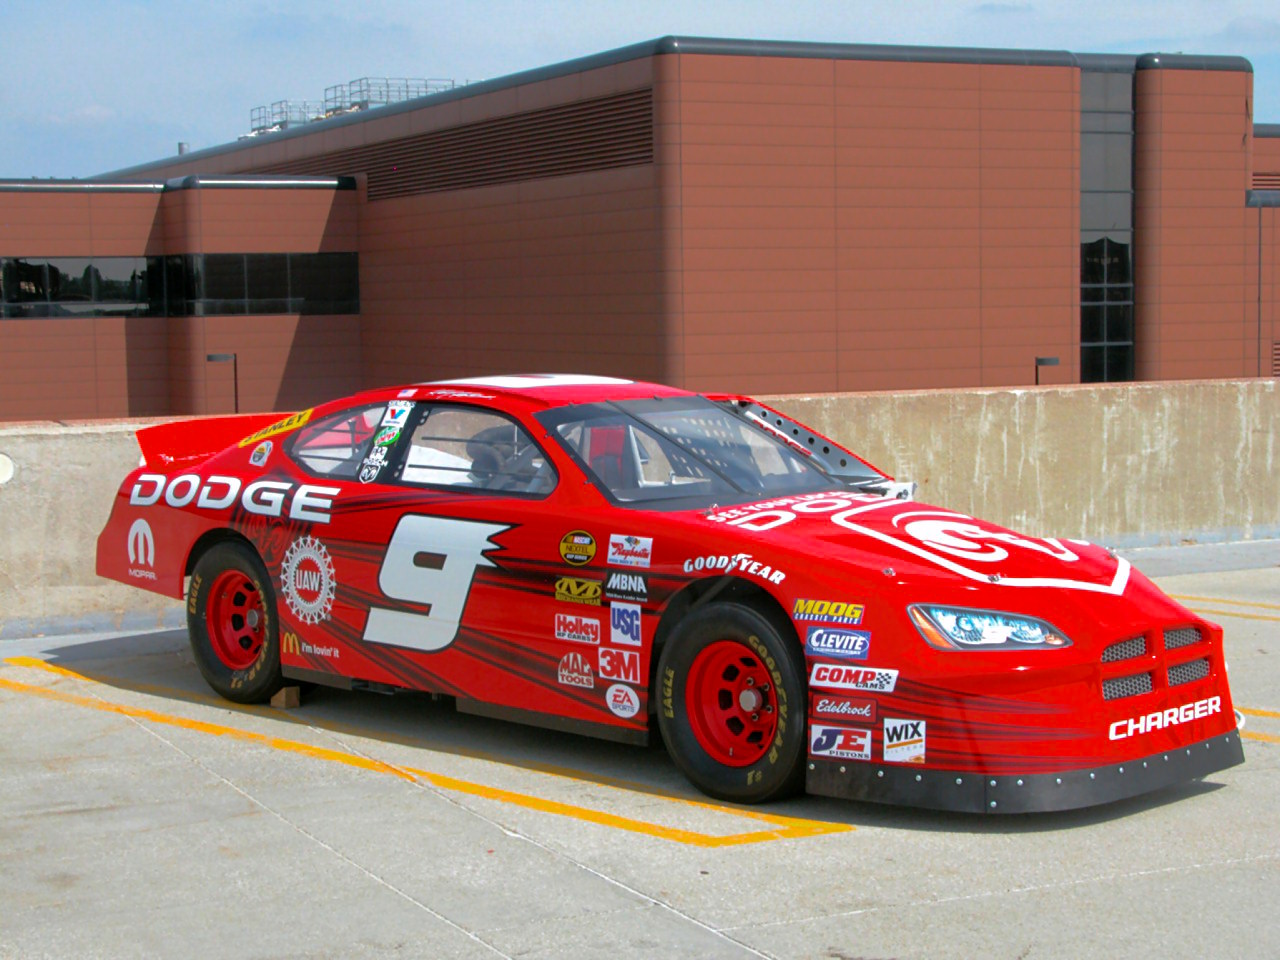 2006-dodge-charger-nascar-race-car-prototype-red-fvr-2005-ww-wd-dctc.jpg